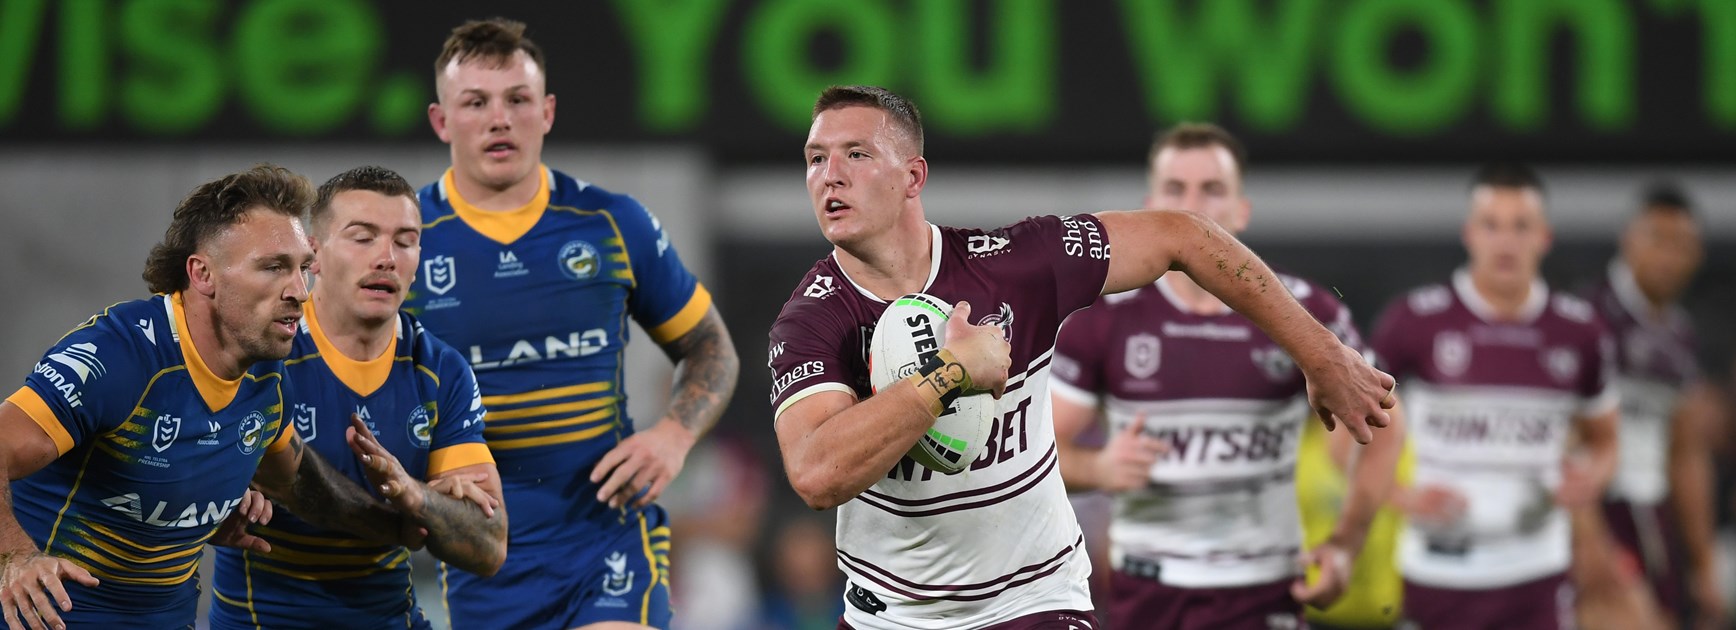 Sea Eagles suffer disappointing loss to Eels